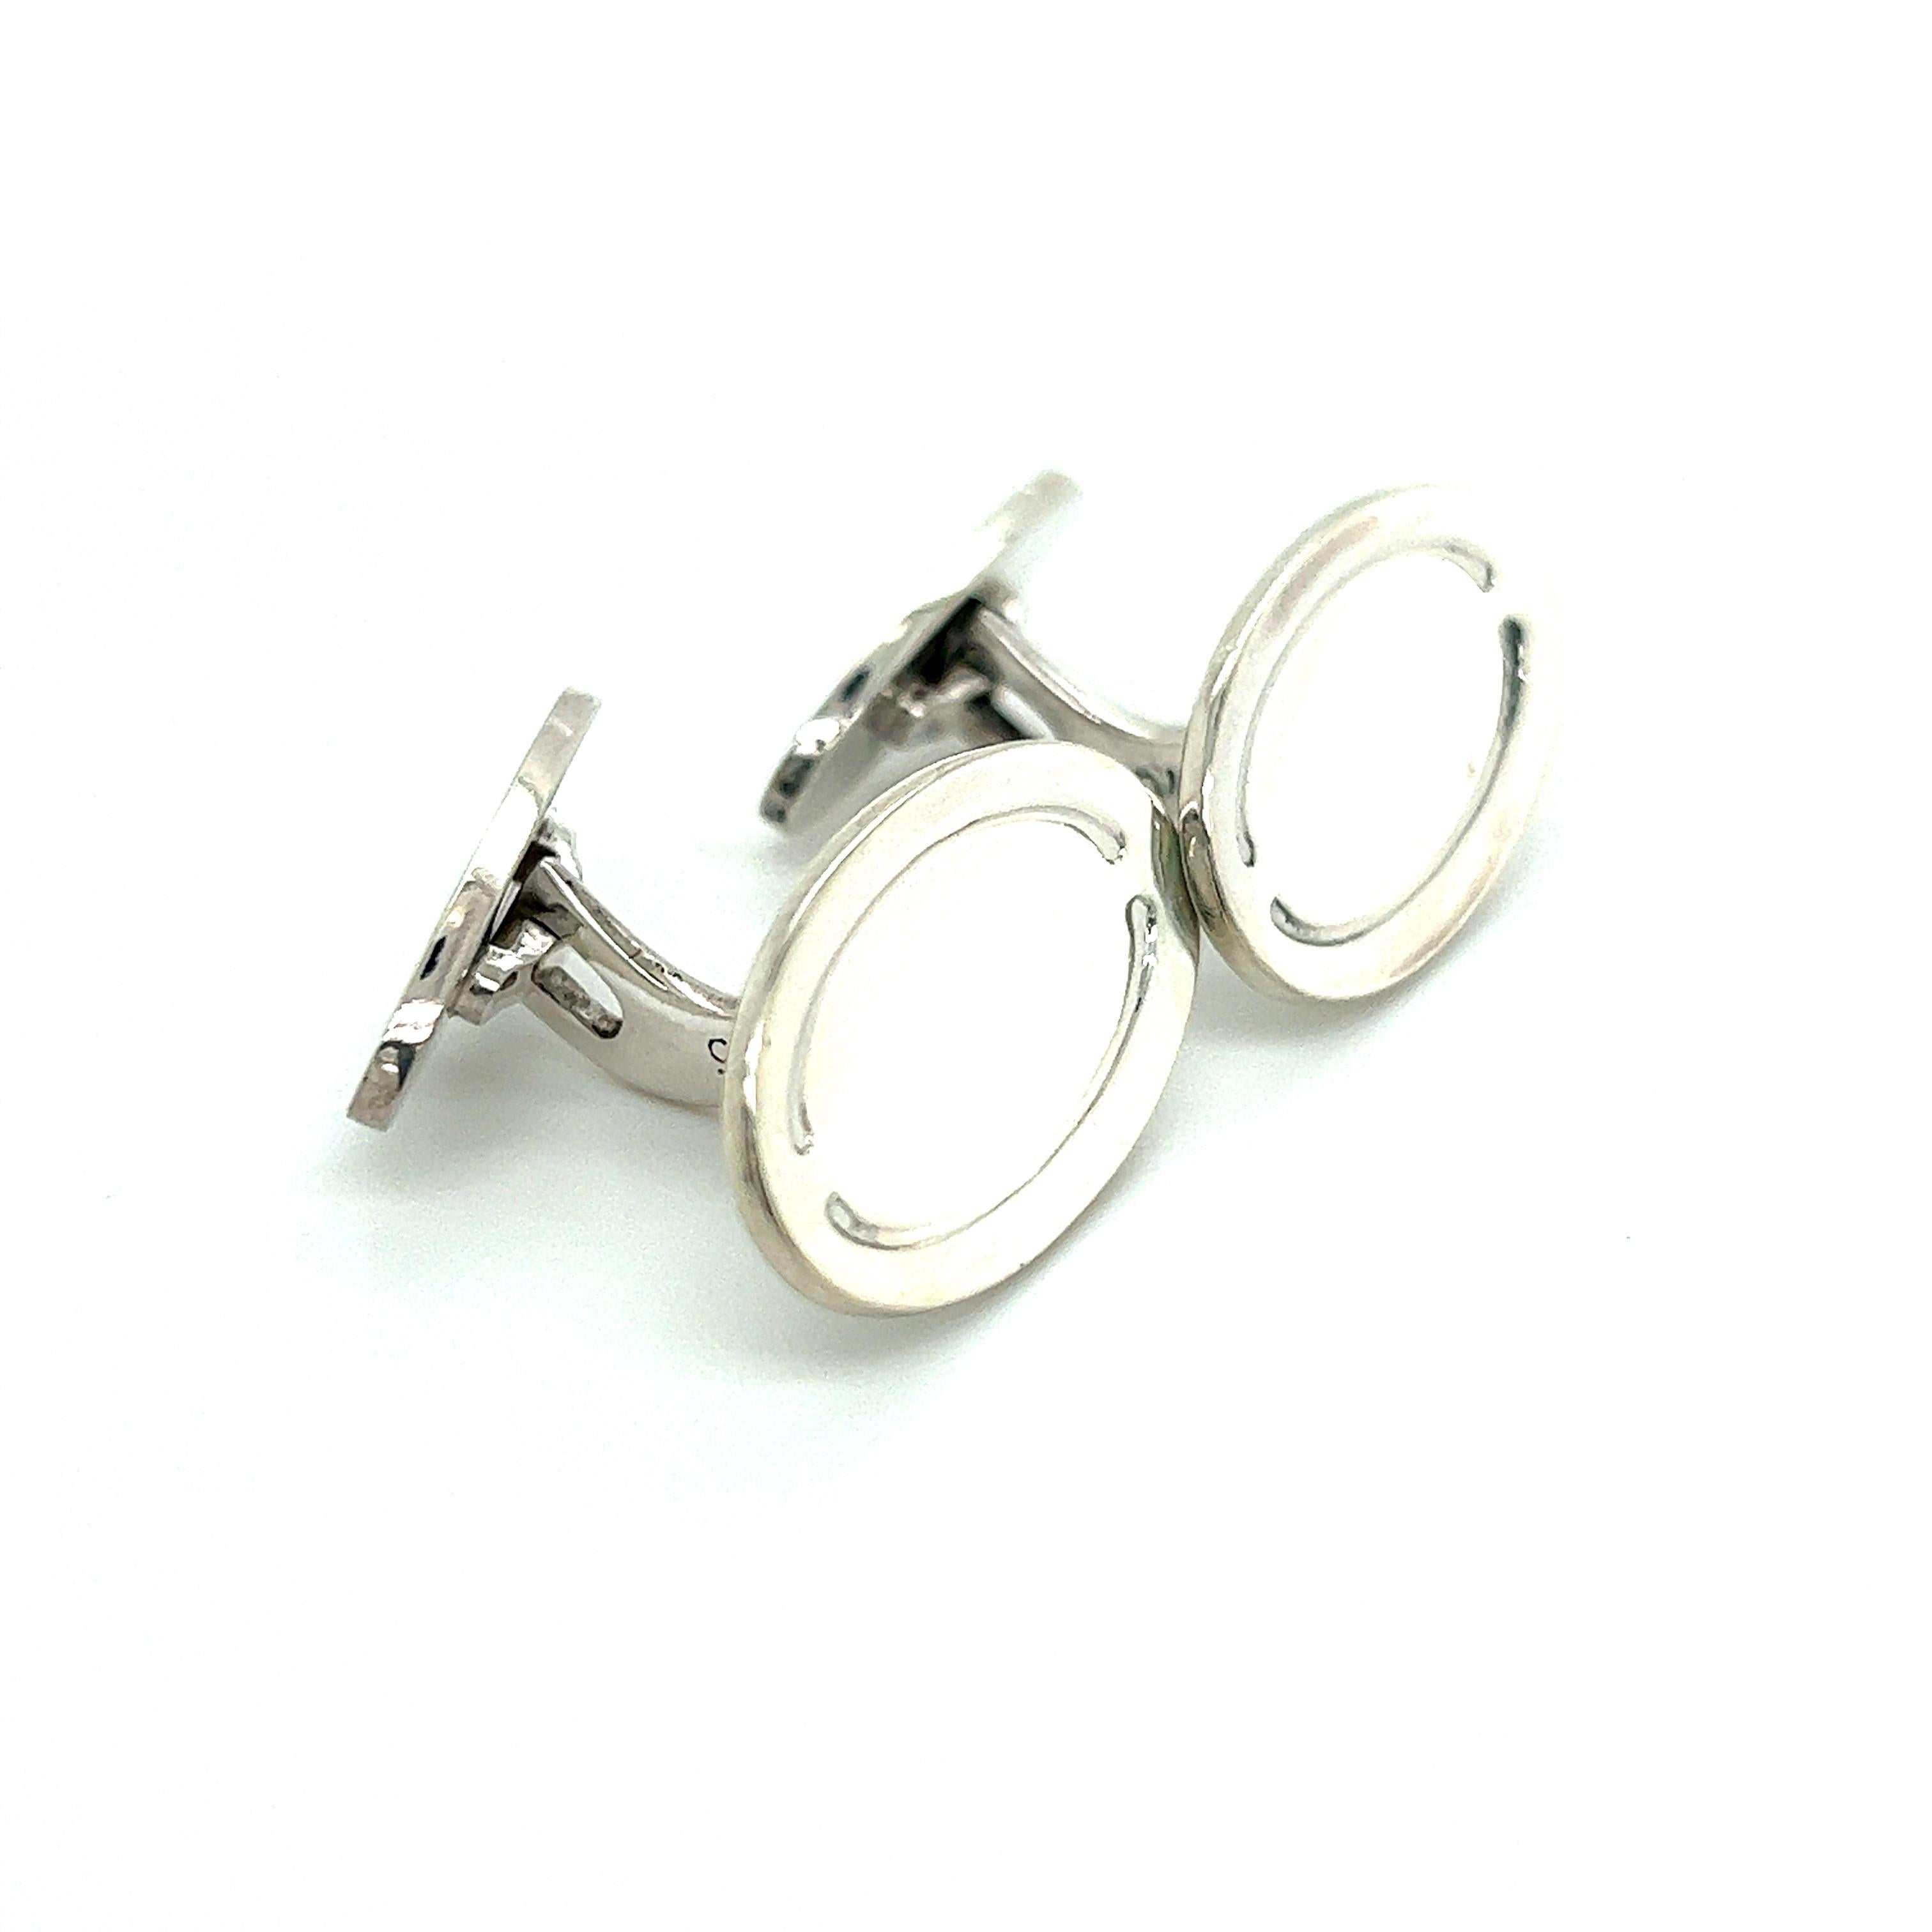 Georg Jensen Estate Mens Cufflinks Silver GJ18

These elegant Authentic Georg Jensen Men's Cufflinks are made of sterling silver and have a weight of 15 grams.

TRUSTED SELLER SINCE 2002

PLEASE SEE OUR HUNDREDS OF POSITIVE FEEDBACKS FROM OUR